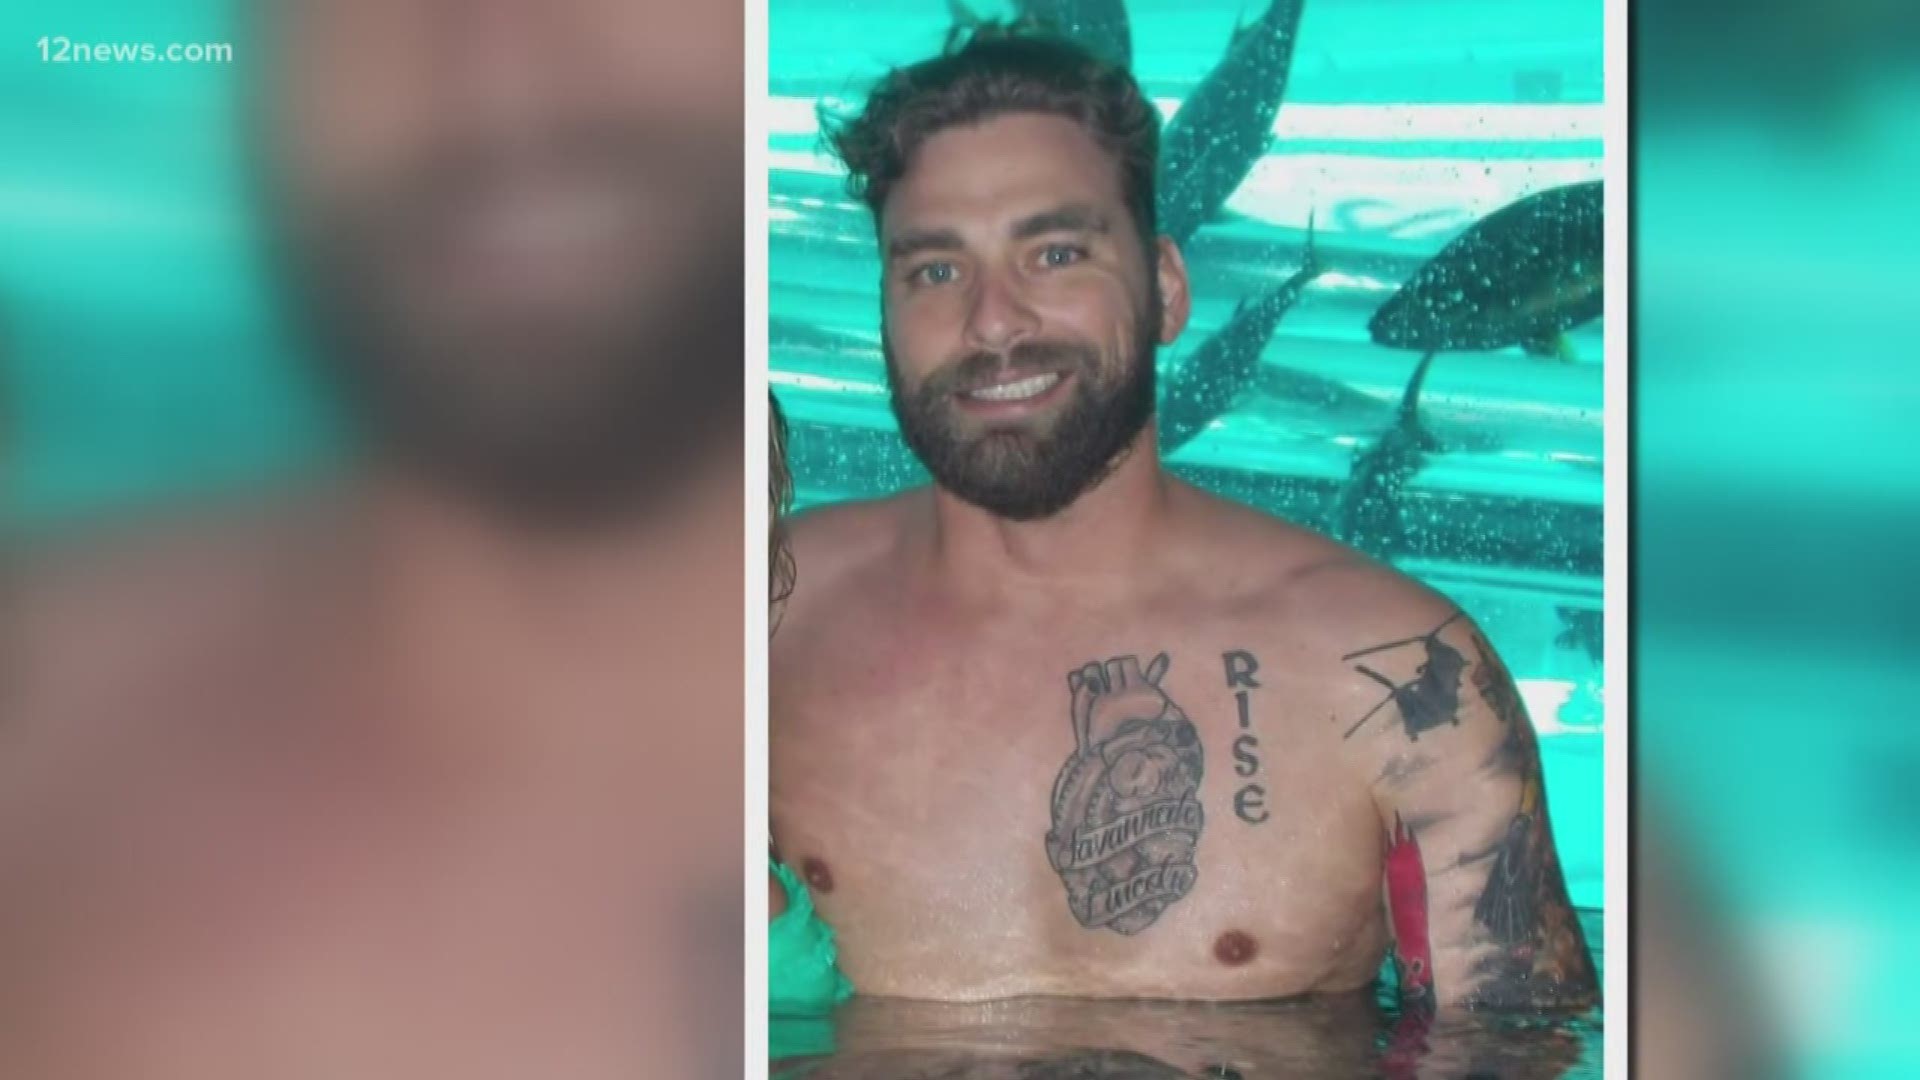 An arrest warrant was issued for Jesse Conger less than a month after he went missing in Scottsdale.